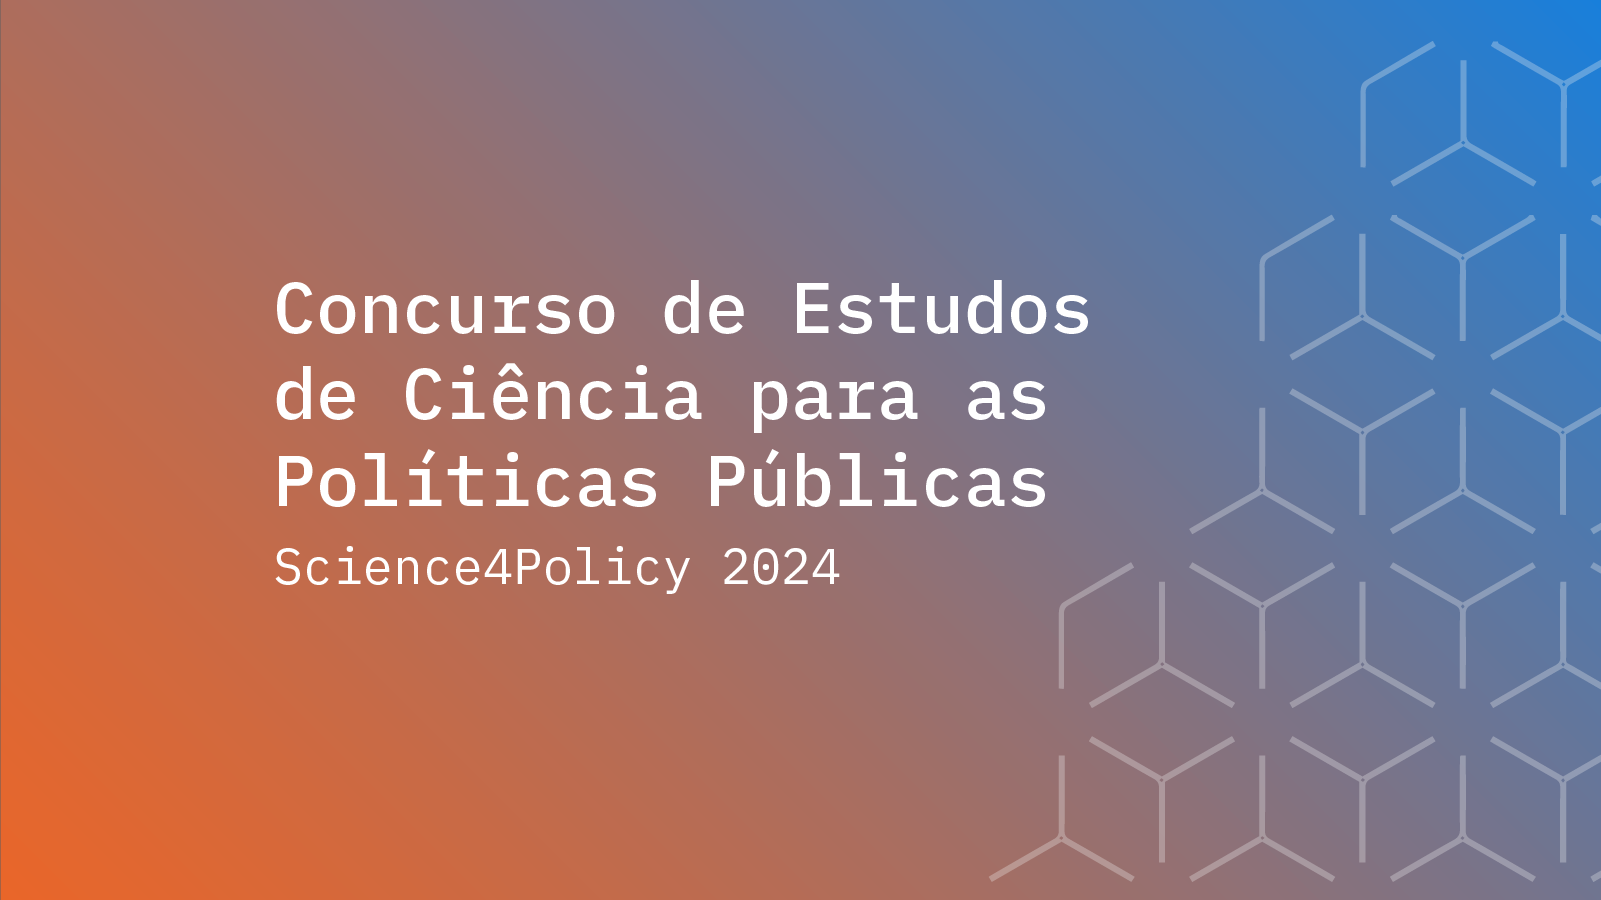 News Call of Science for Public Policy Studies